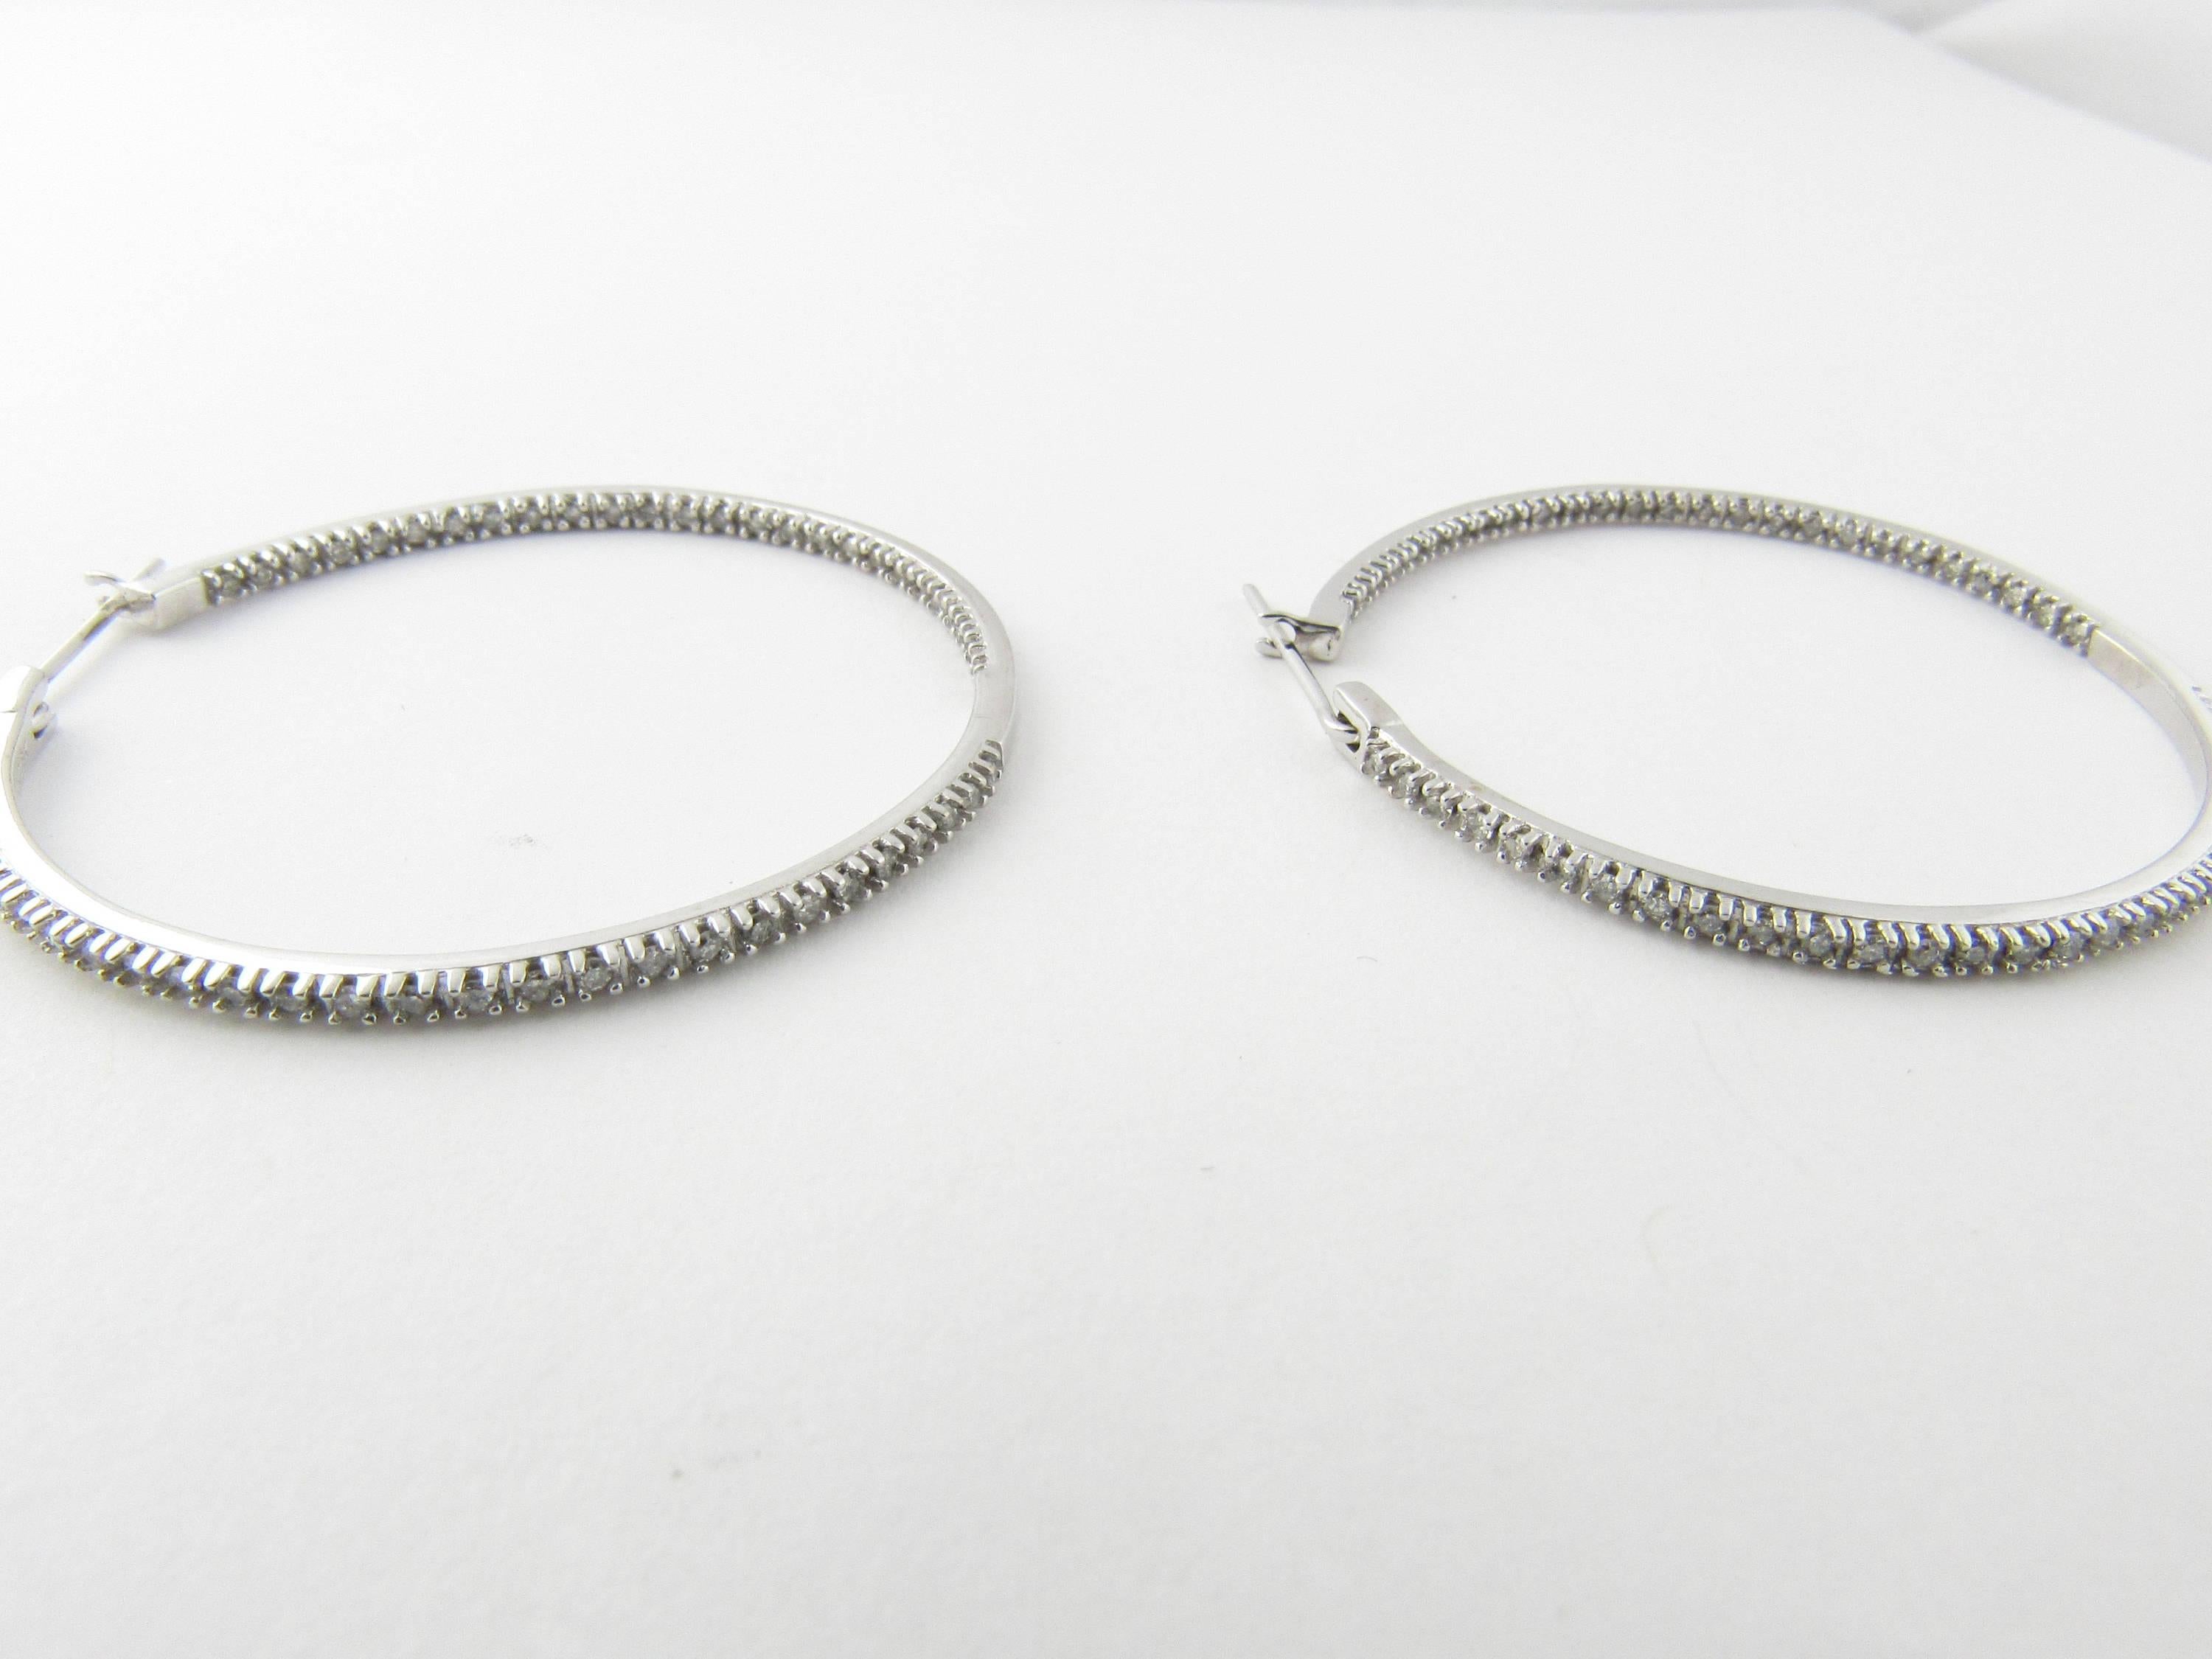 Vintage 10 Karat White Gold Diamond Hoop Earrings-

These sparkling hoop earrings feature 55 round brilliant single cut diamonds in each (29 in the front and 26 in the back) set in 10K white gold. 

Approximate total diamond weight: 1.10